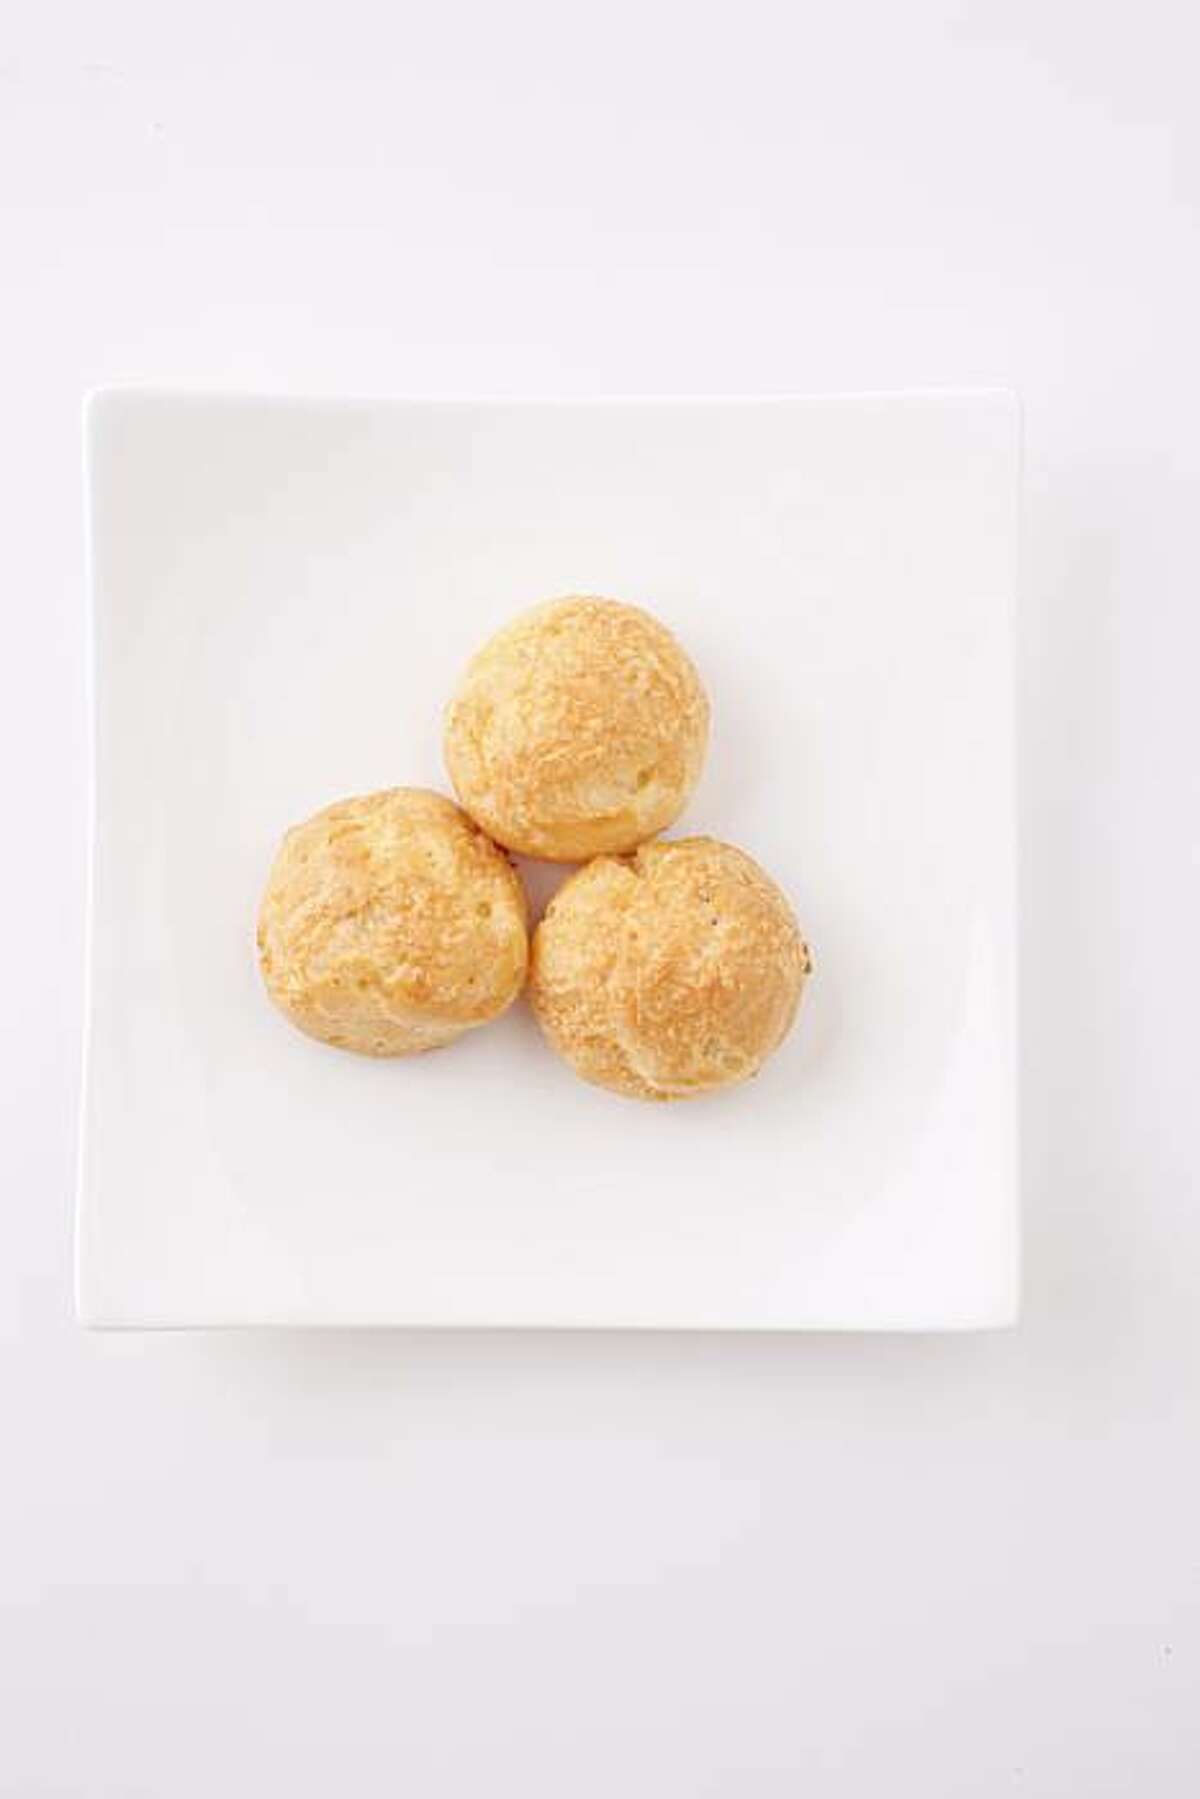 Gougeres in San Francisco, Calif., on March 24, 2010. Food styled by Julia Mitchell.